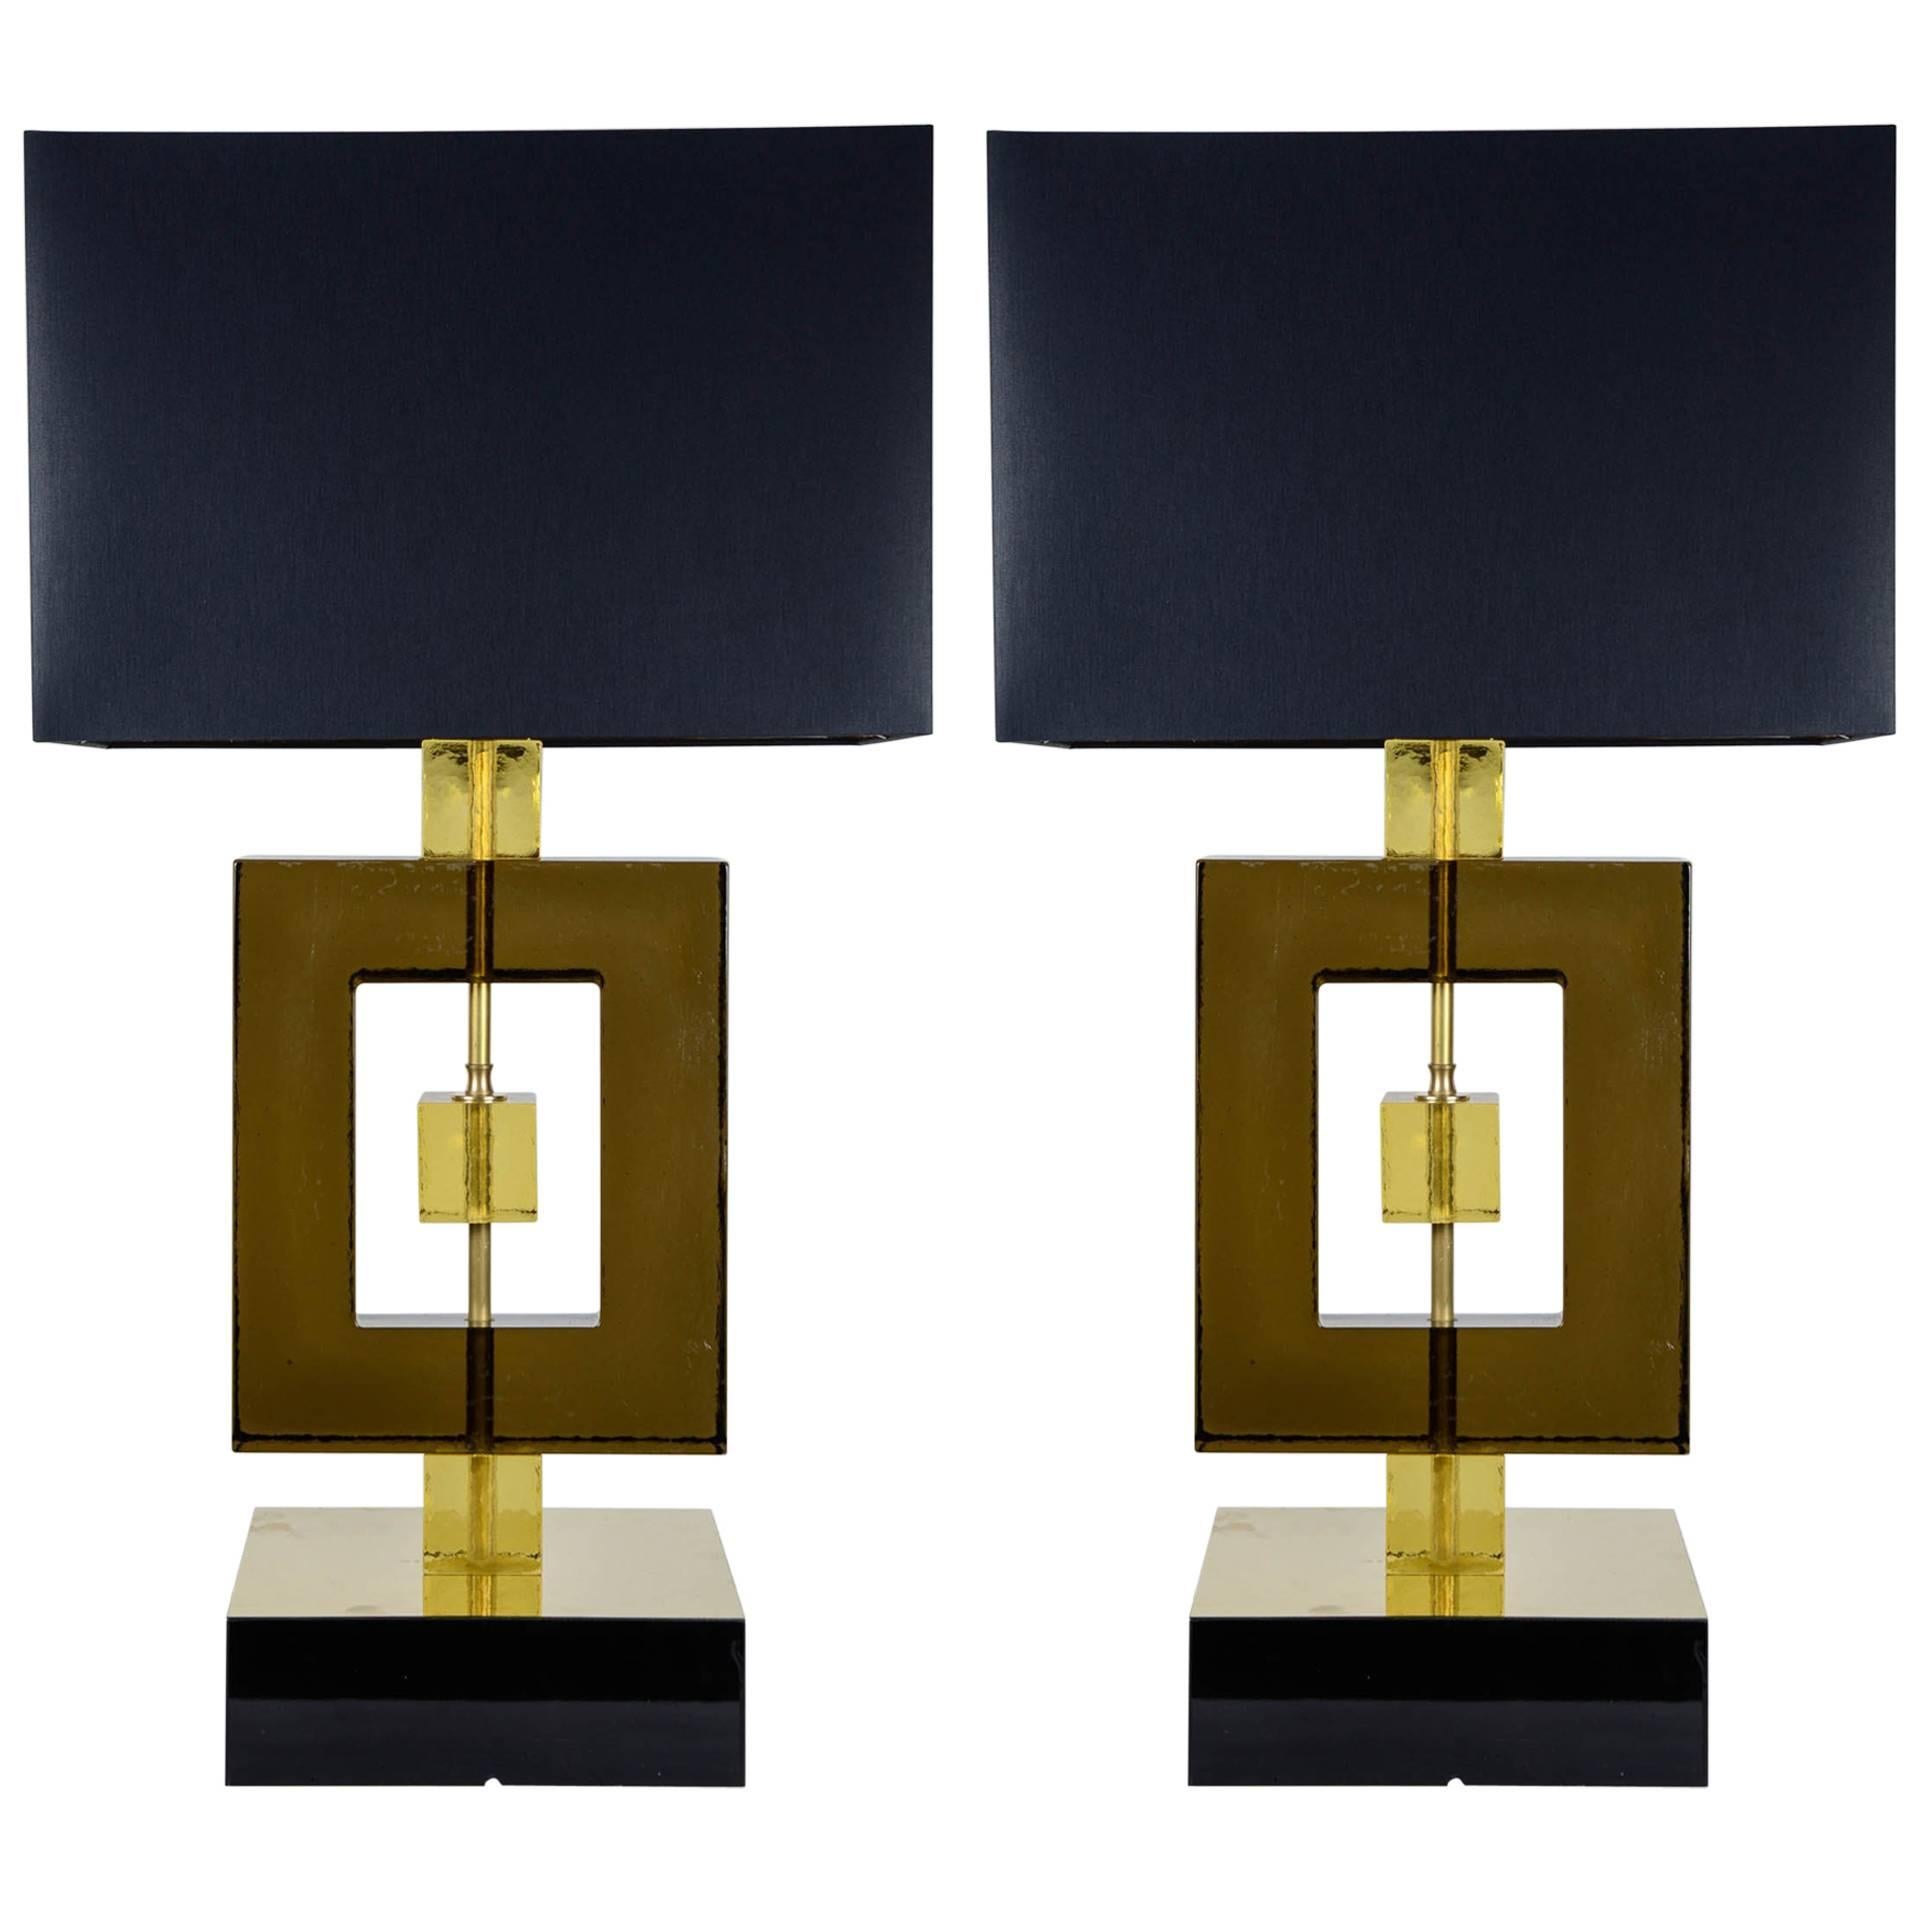 Pair of Murano Glass Lamps in the Style of Cenedese